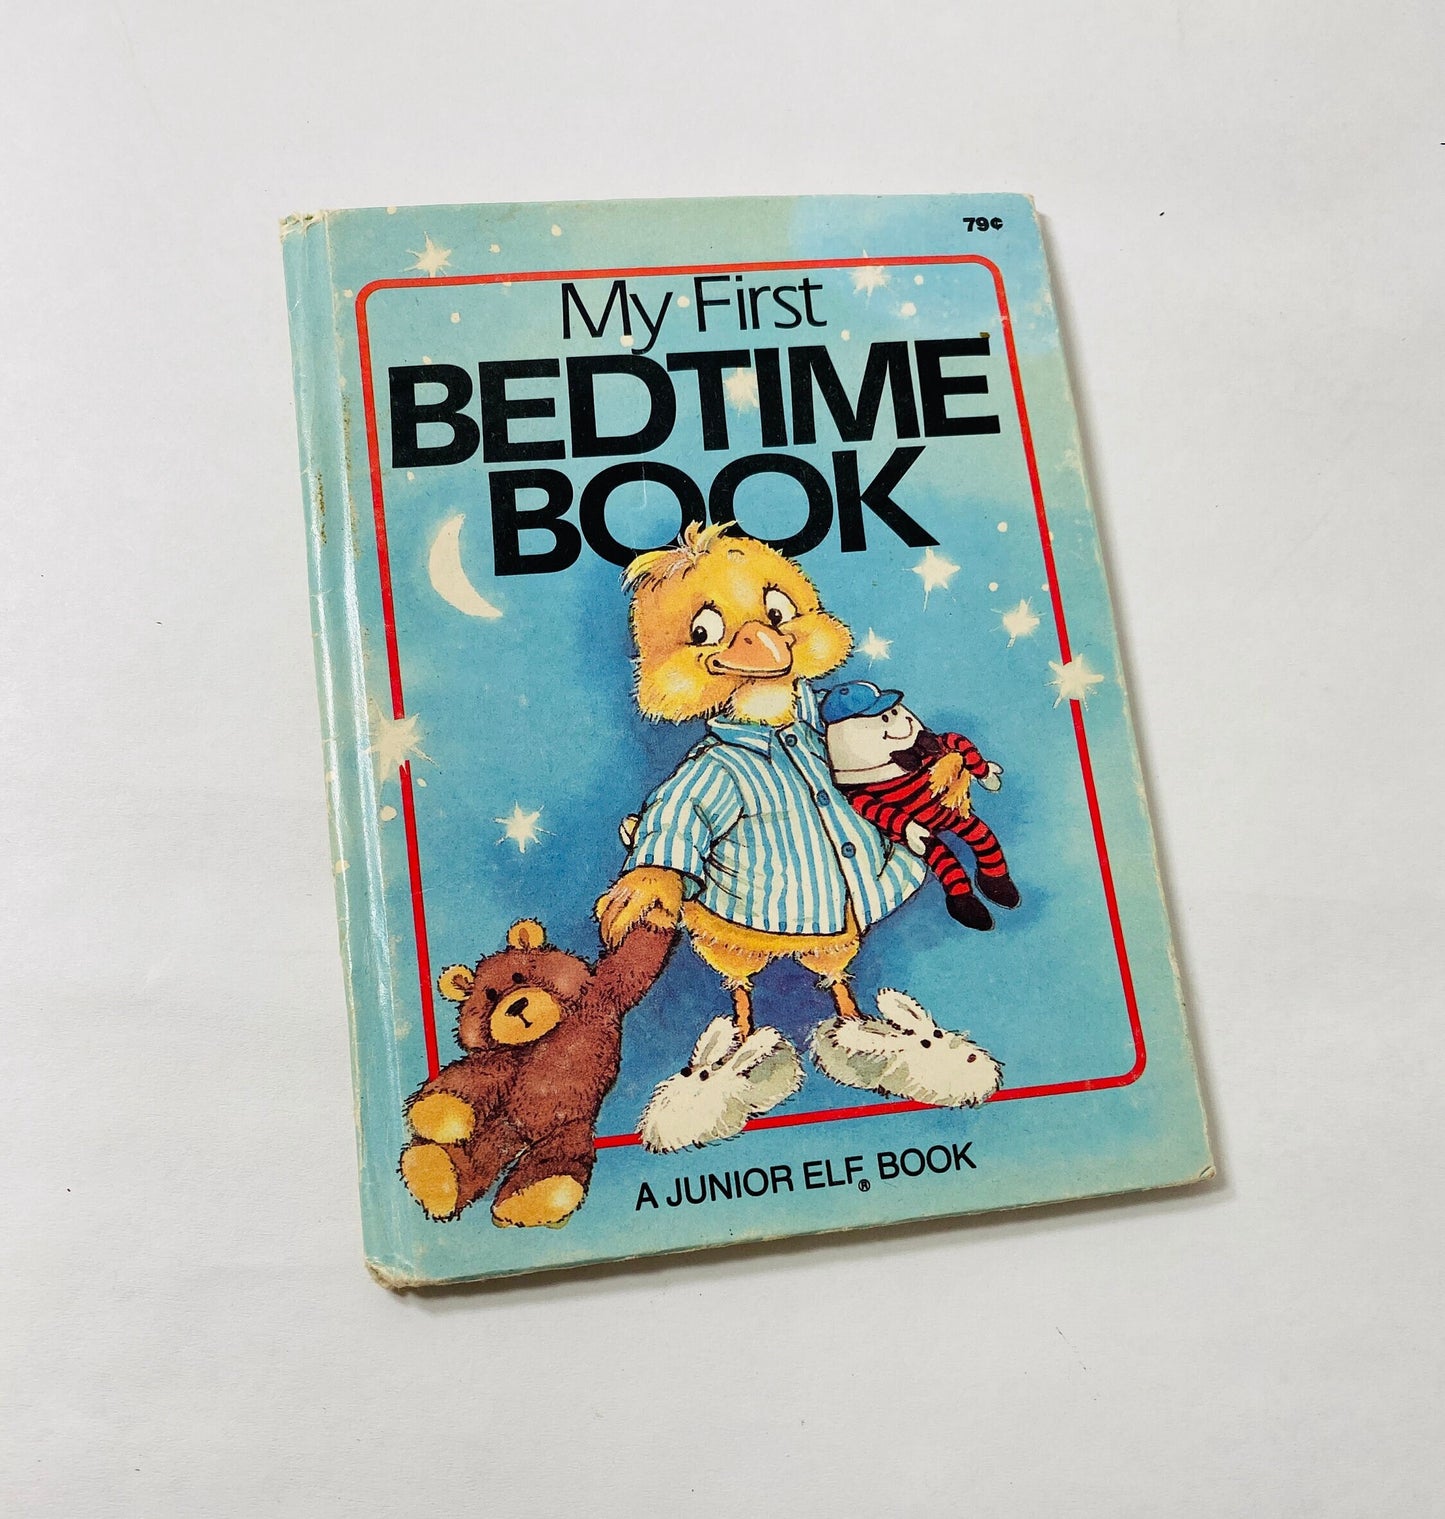 My First Bedtime Book Vintage book by Mary Packard FIRST EDITION Junior Elf Book circa 1987.